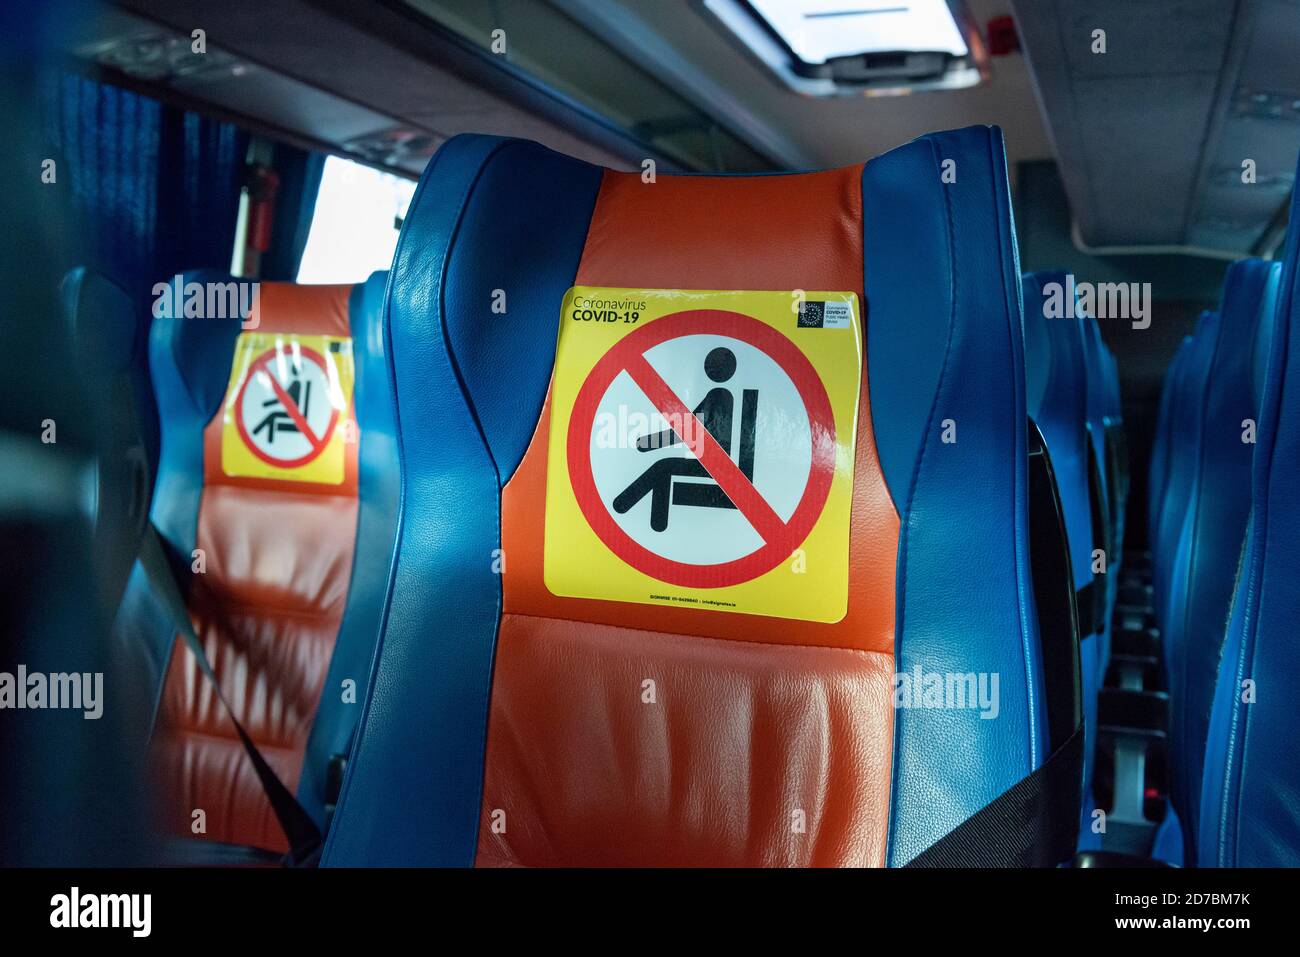 Social distancing yellow sign on seat inside bus during the pandemic outbreak of Coronavirus Covid 19 in Ireland, Europe Stock Photo